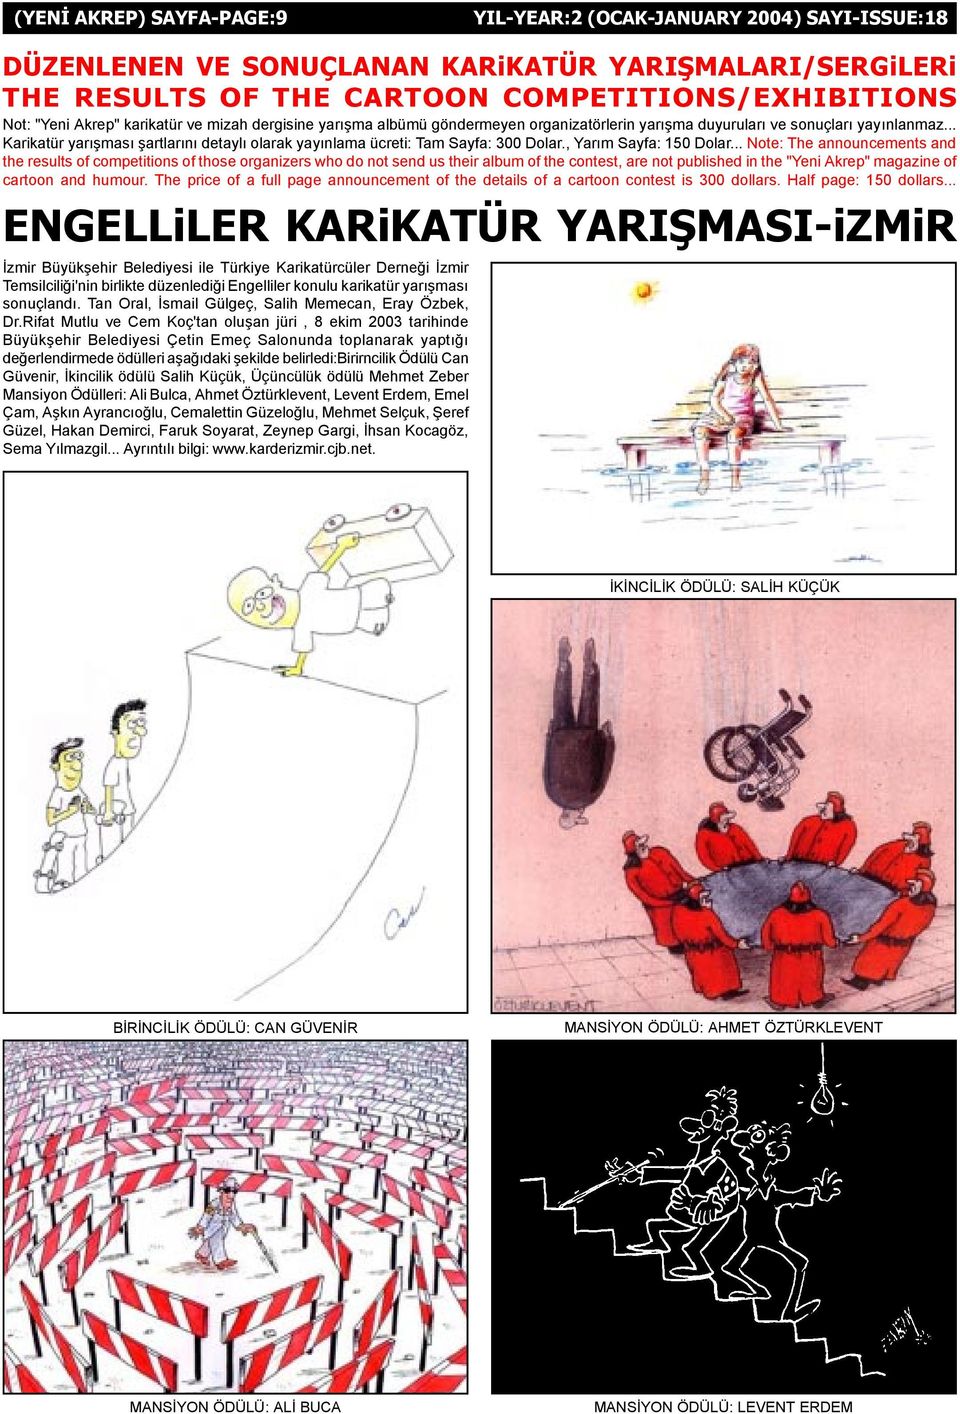 .. Note: The announcements and the results of competitions of those organizers who do not send us their album of the contest, are not published in the "Yeni Akrep" magazine of cartoon and humour.